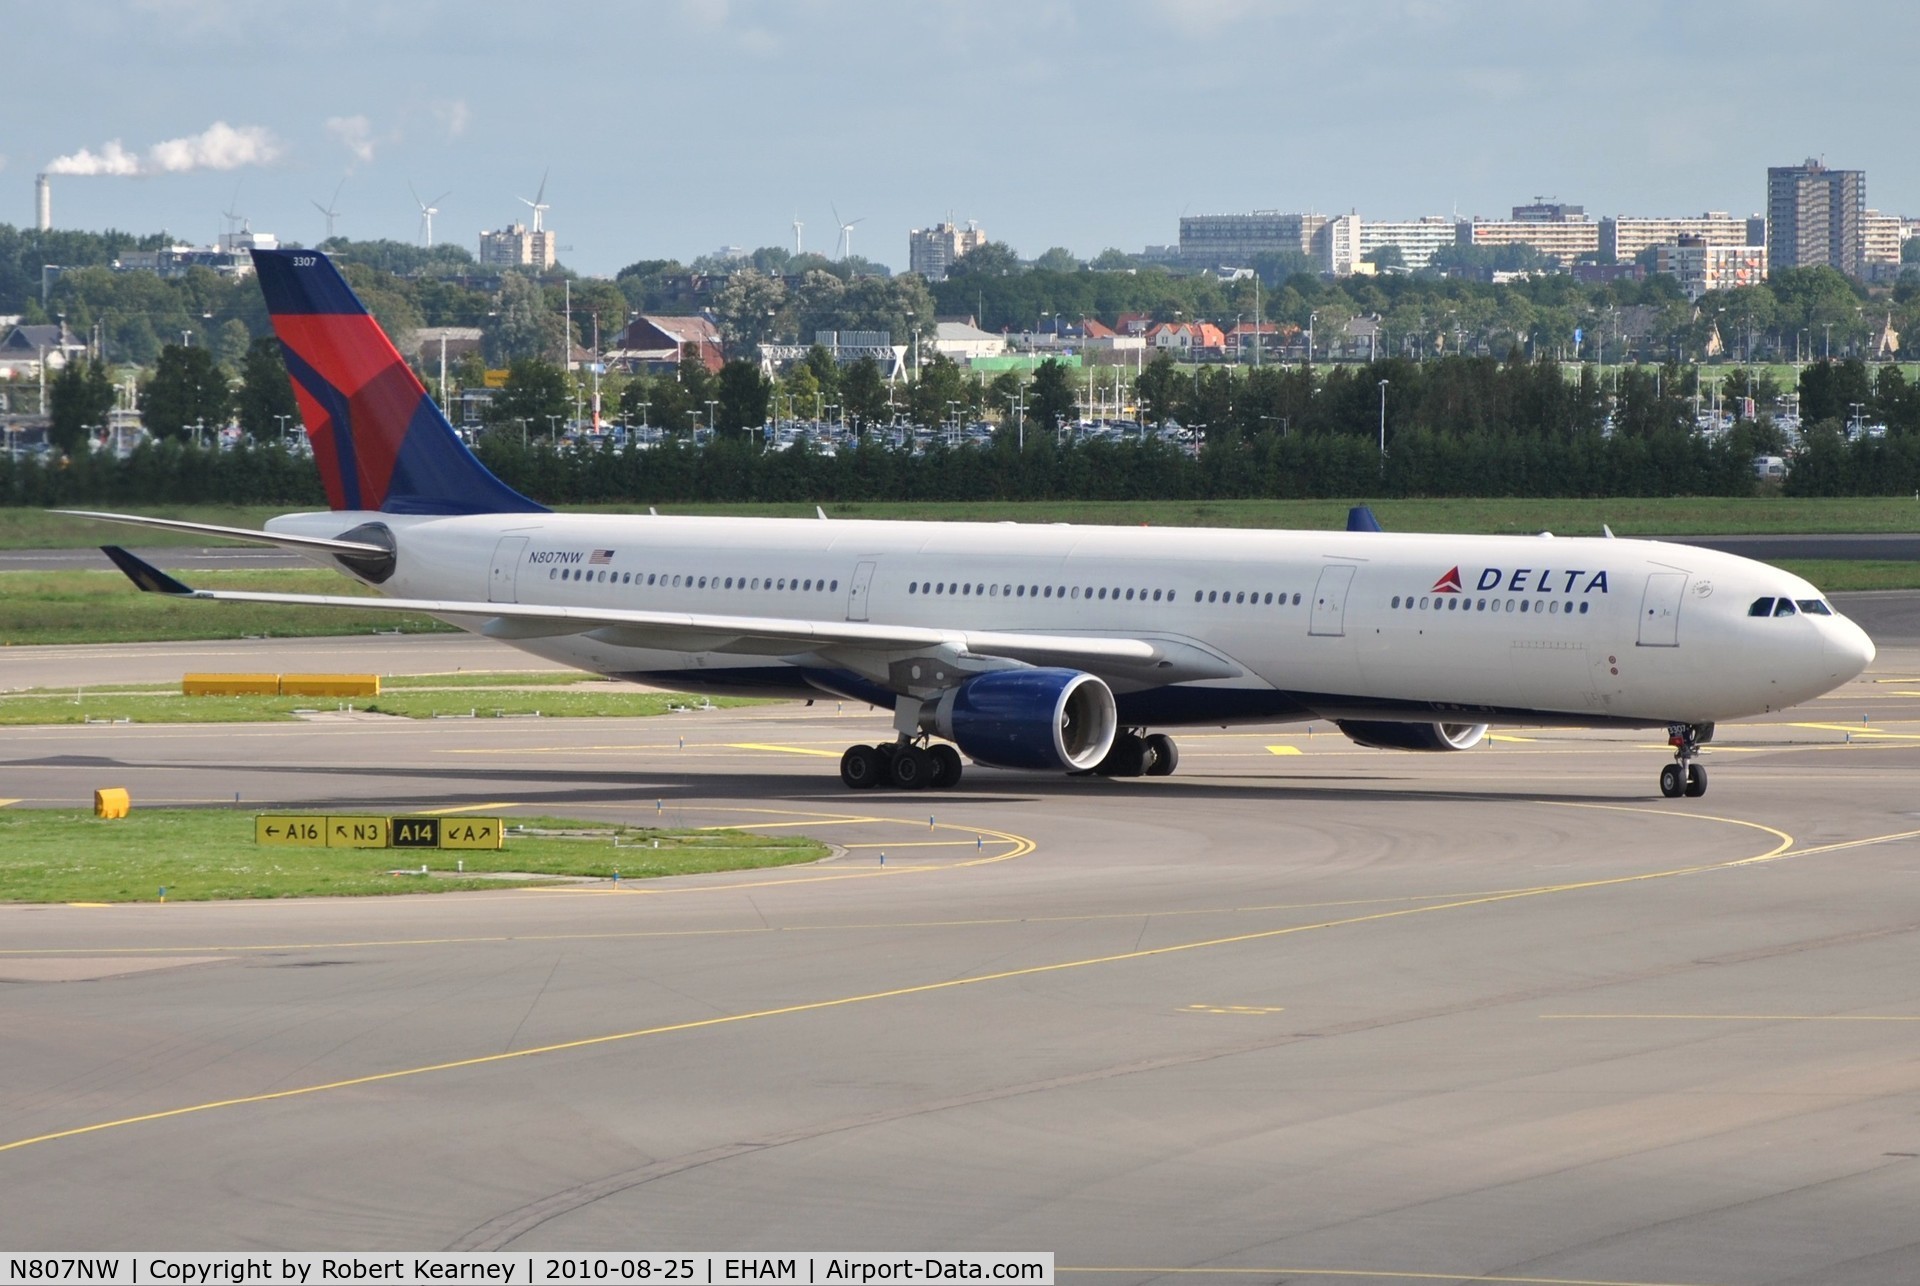 N807NW, 2004 Airbus A330-323 C/N 0588, DAL taxiing in to parking